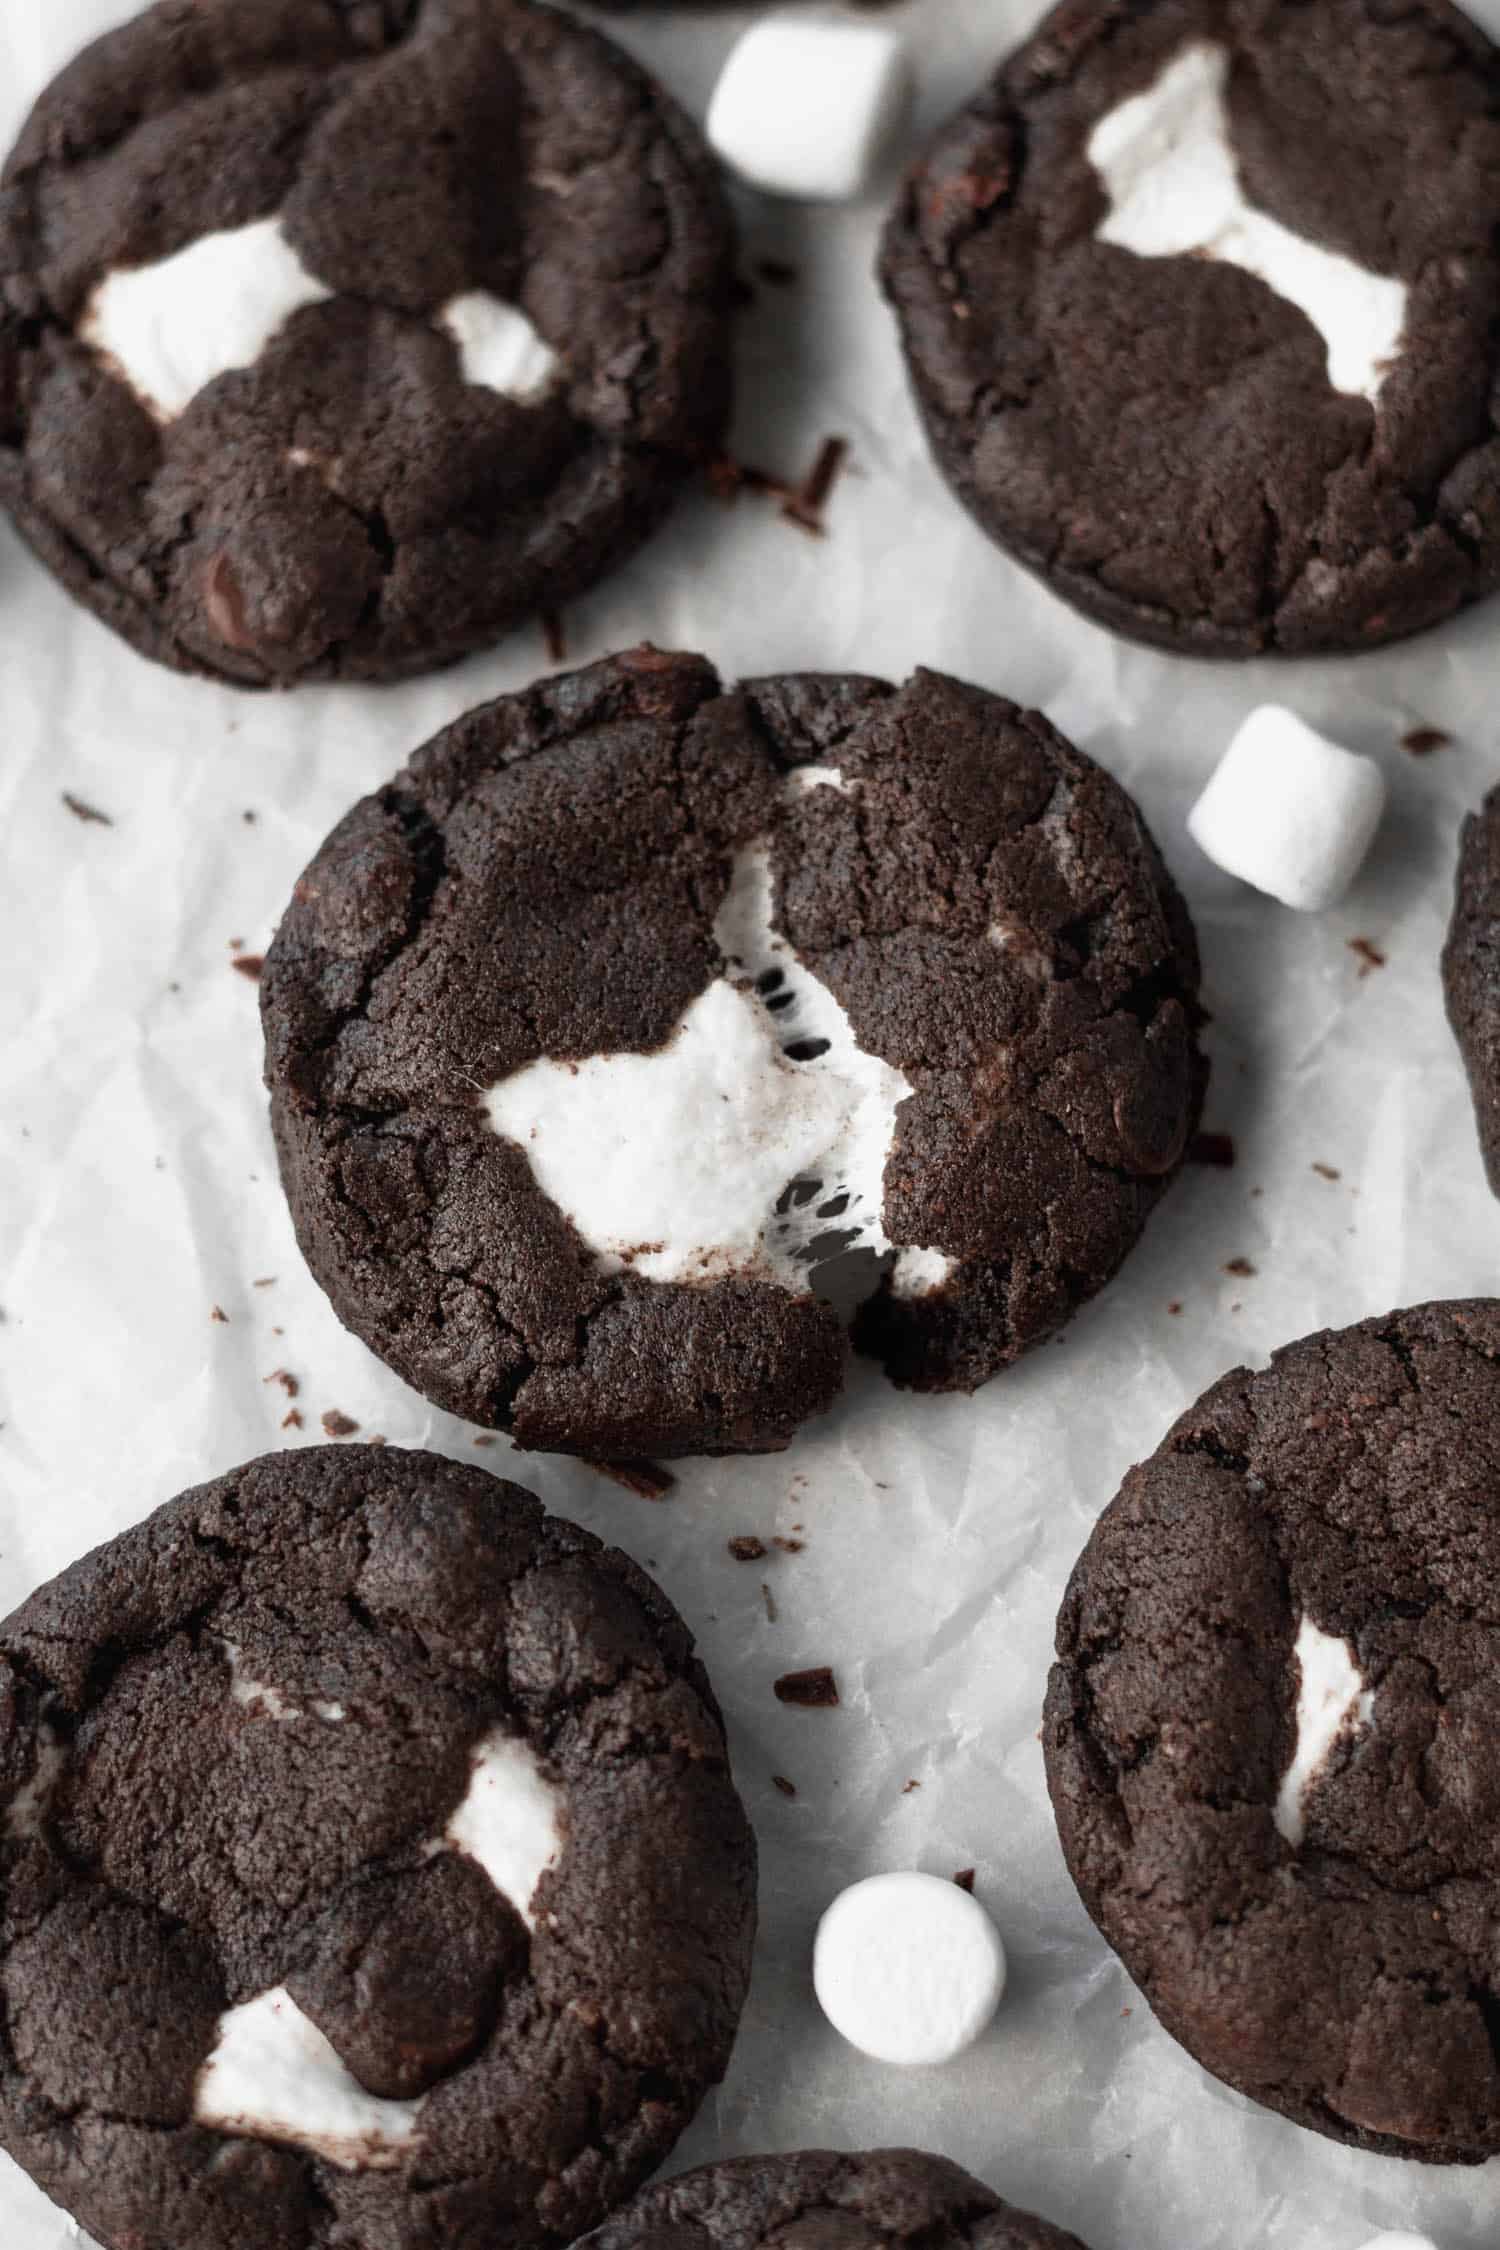 Gluten-free and dairy-free chocolate cookies